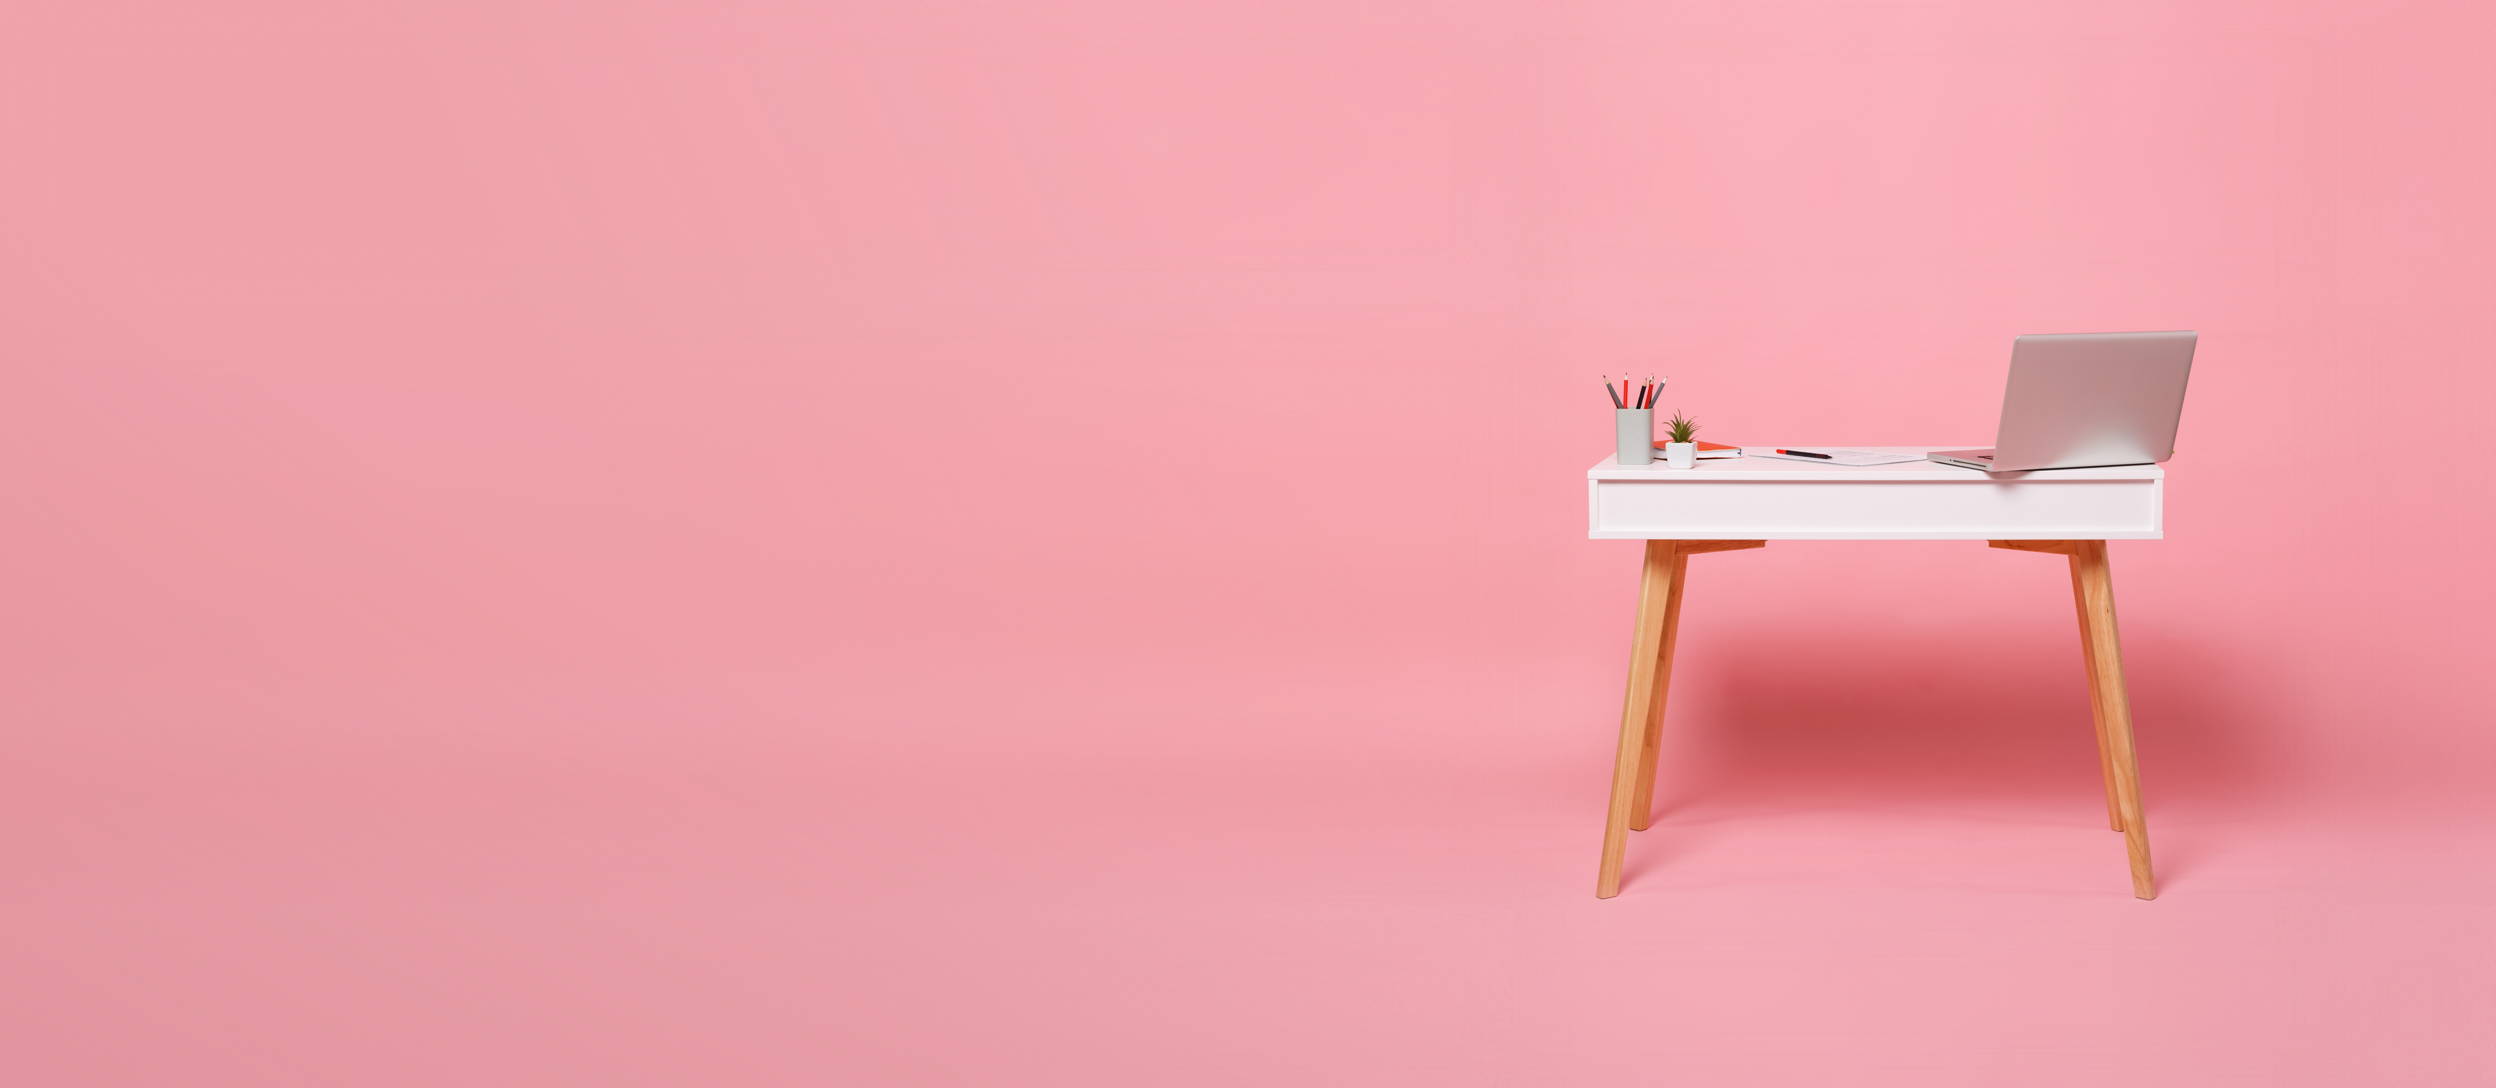 Desk with a laptop and office supplies against a pink background (large)